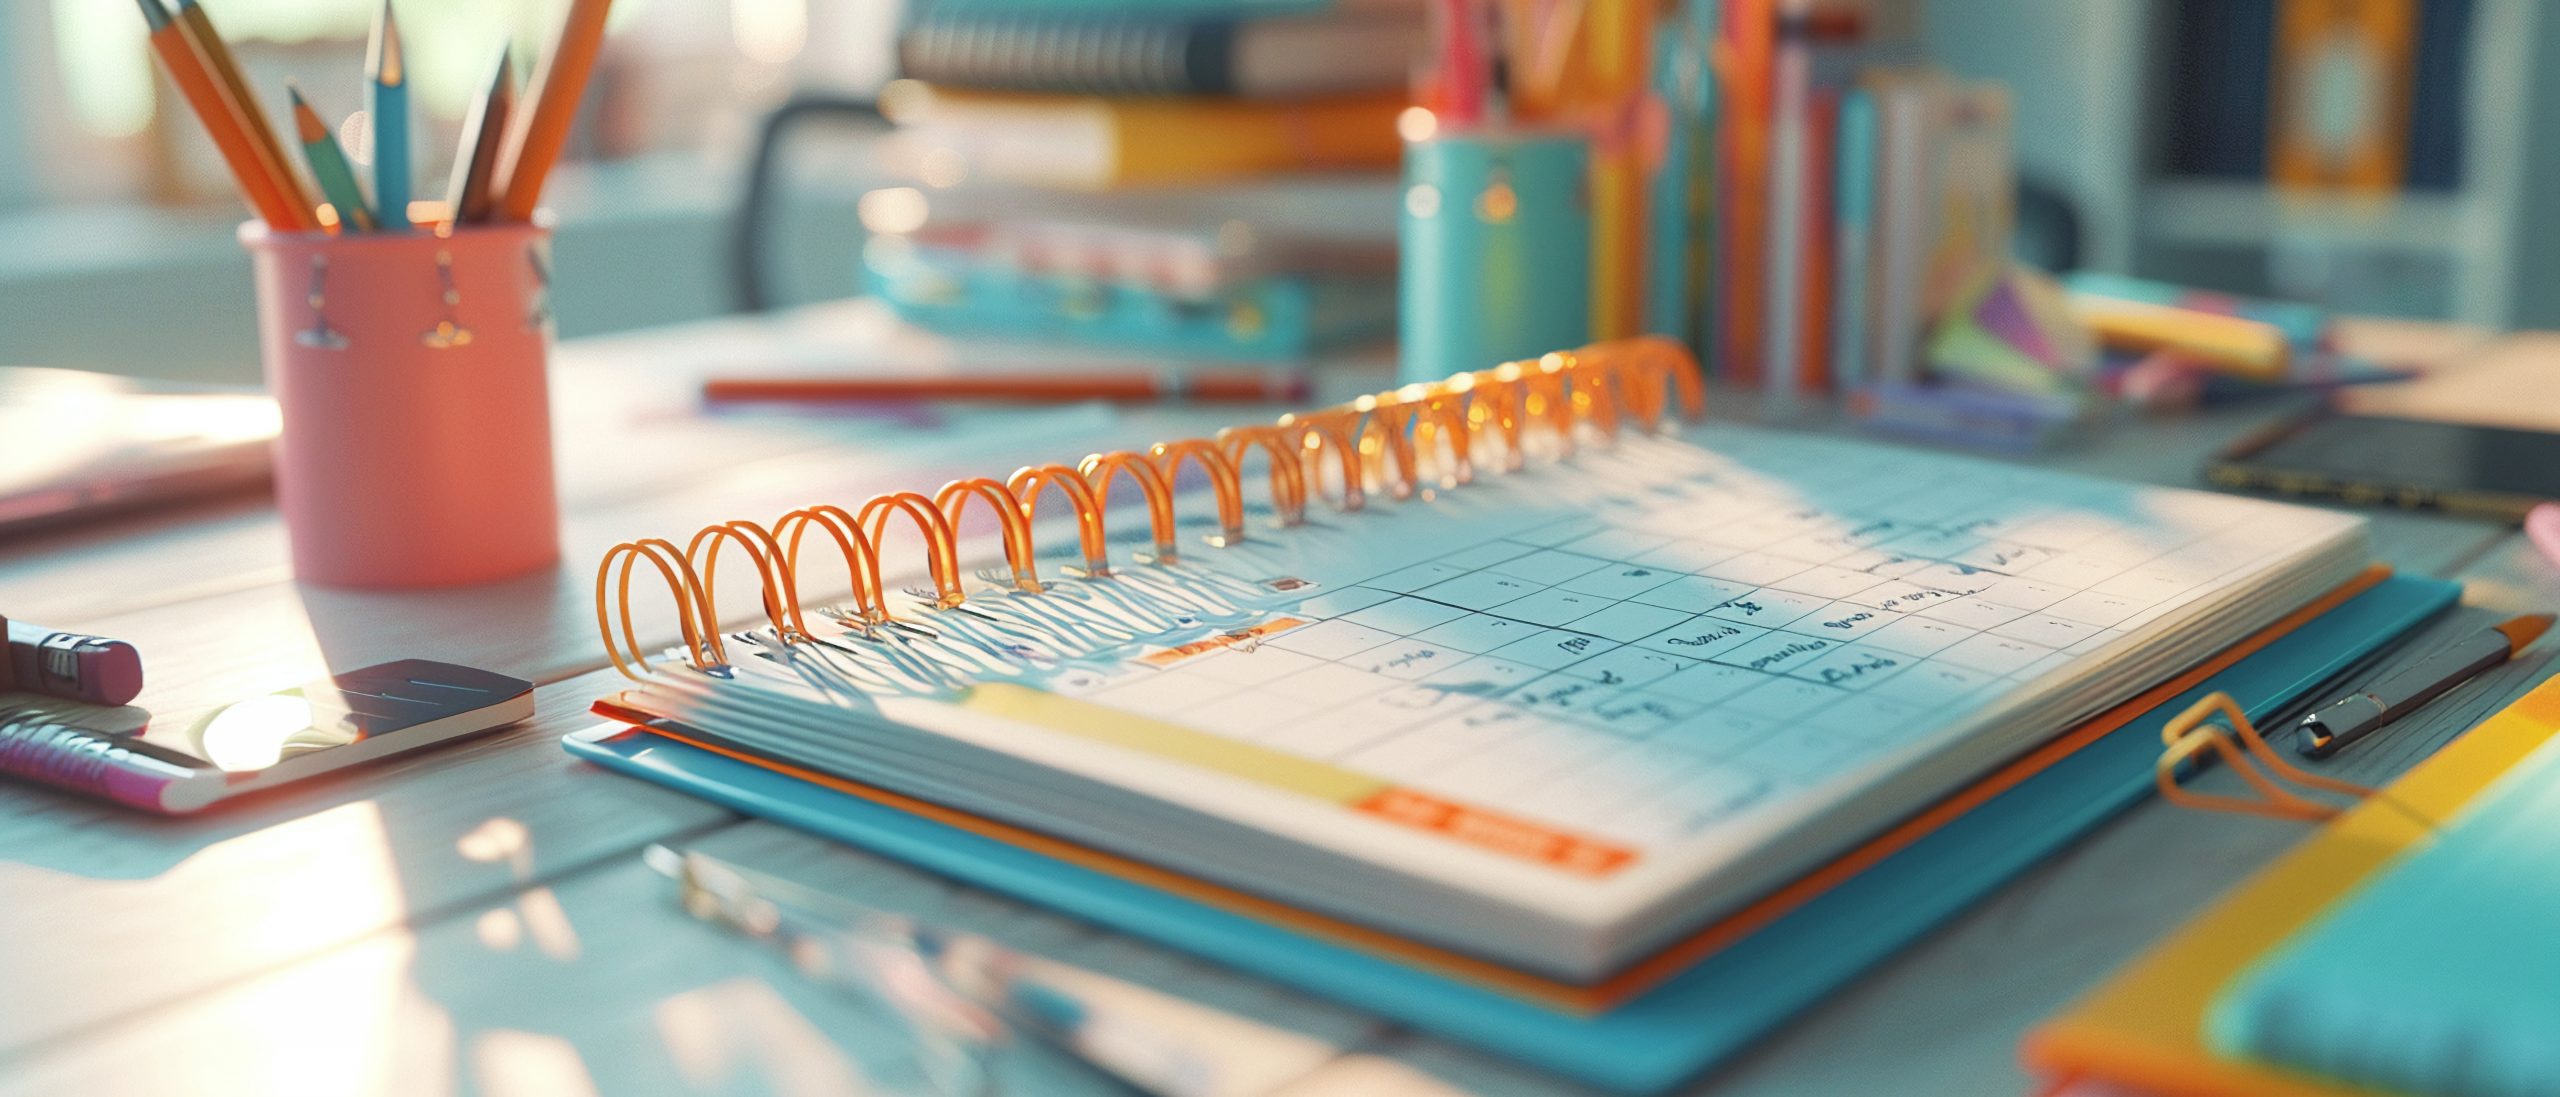 Open planner with handwritten notes on a desk surrounded by pencils, erasers, and a calculator in a brightly lit, colorful setting.